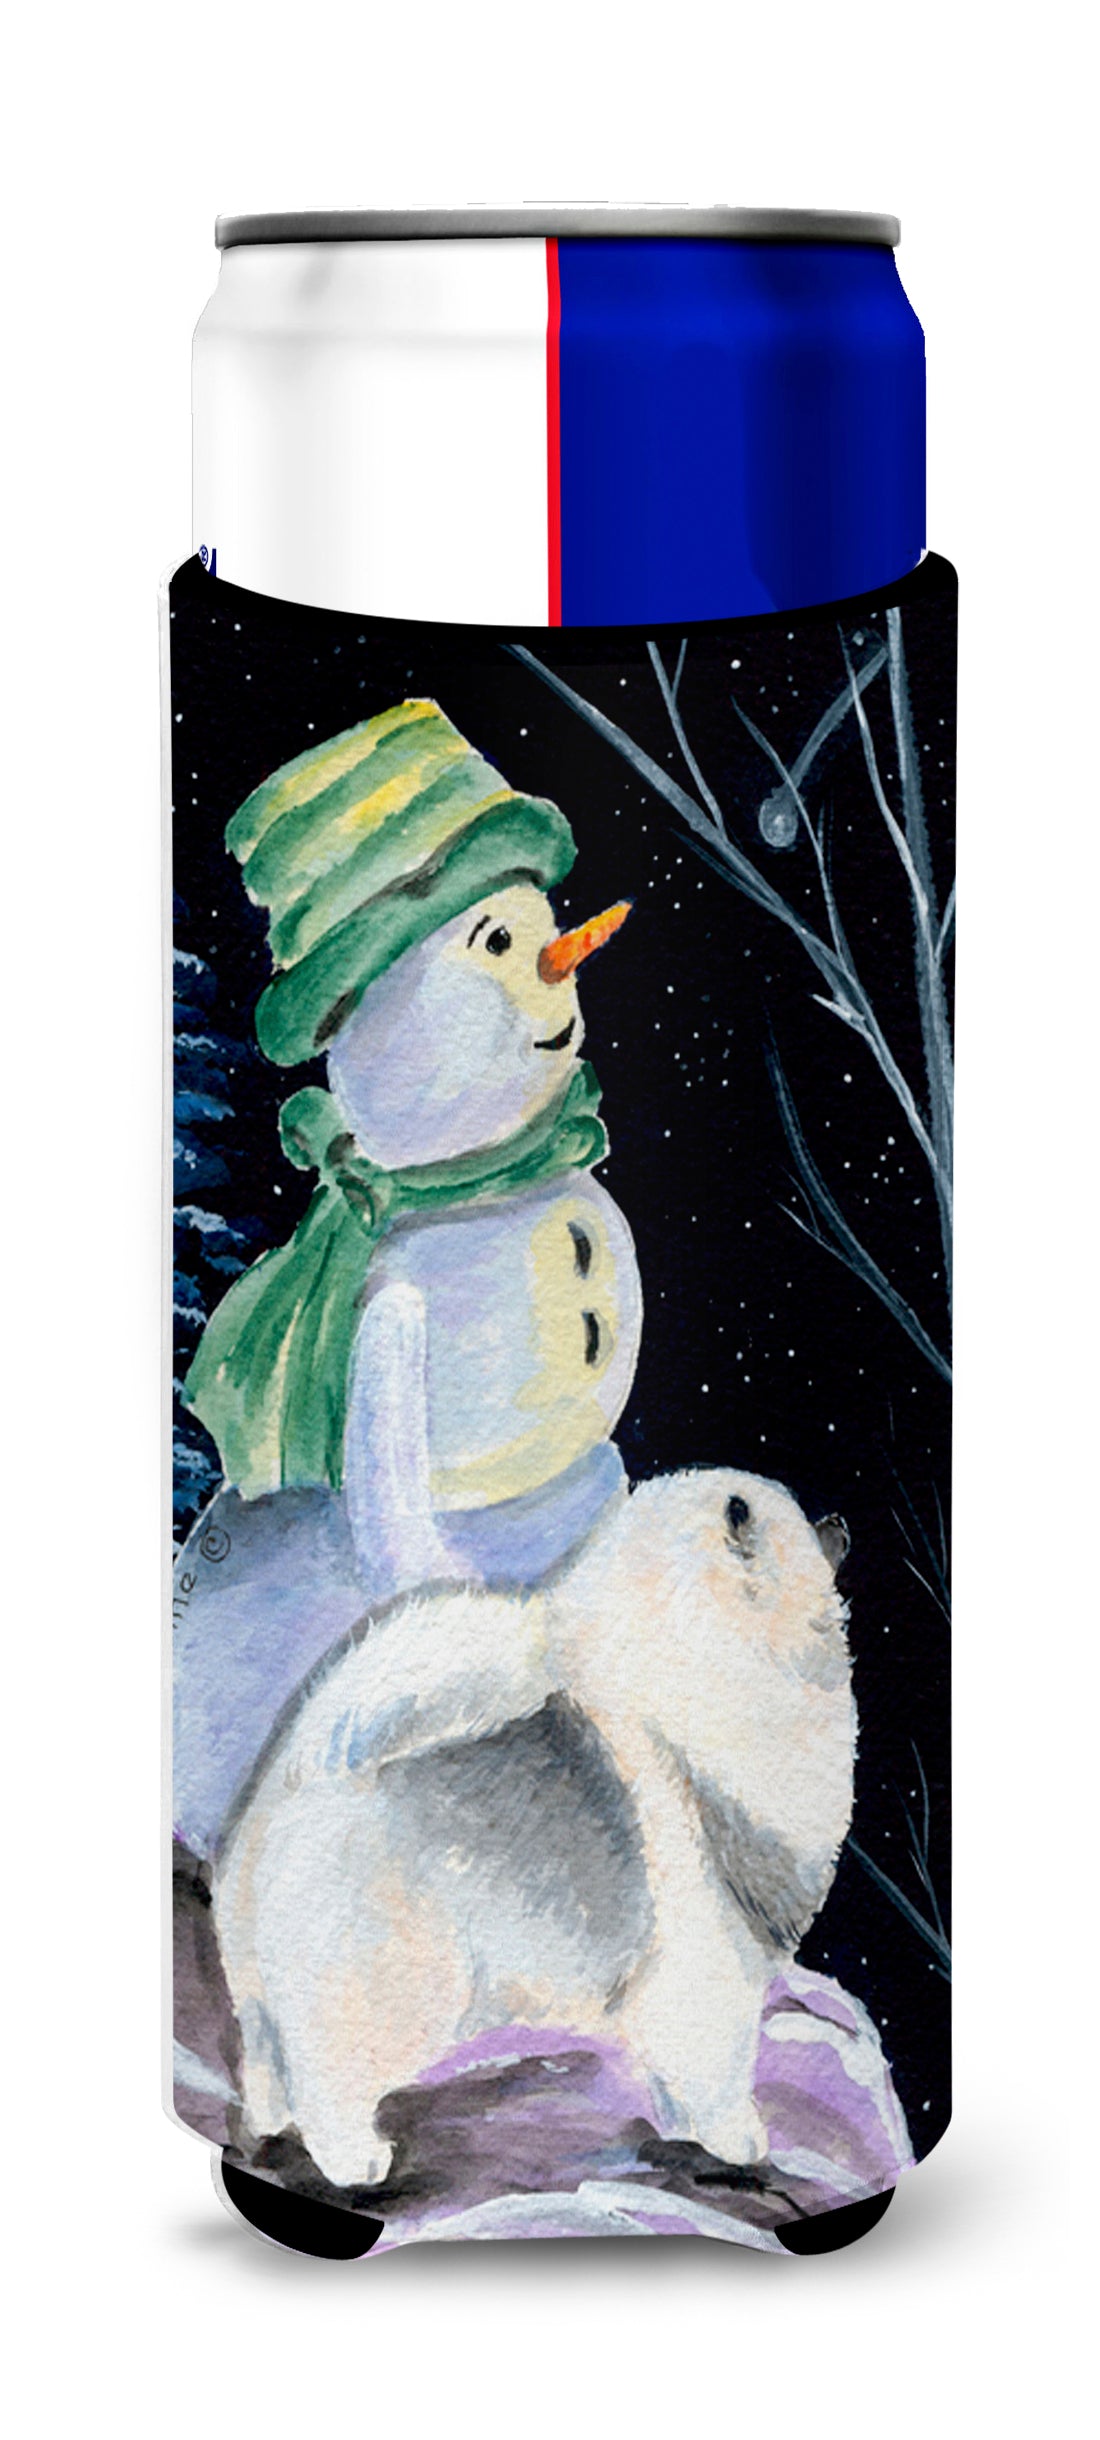 Snowman with Keeshond Ultra Beverage Insulators for slim cans SS8557MUK